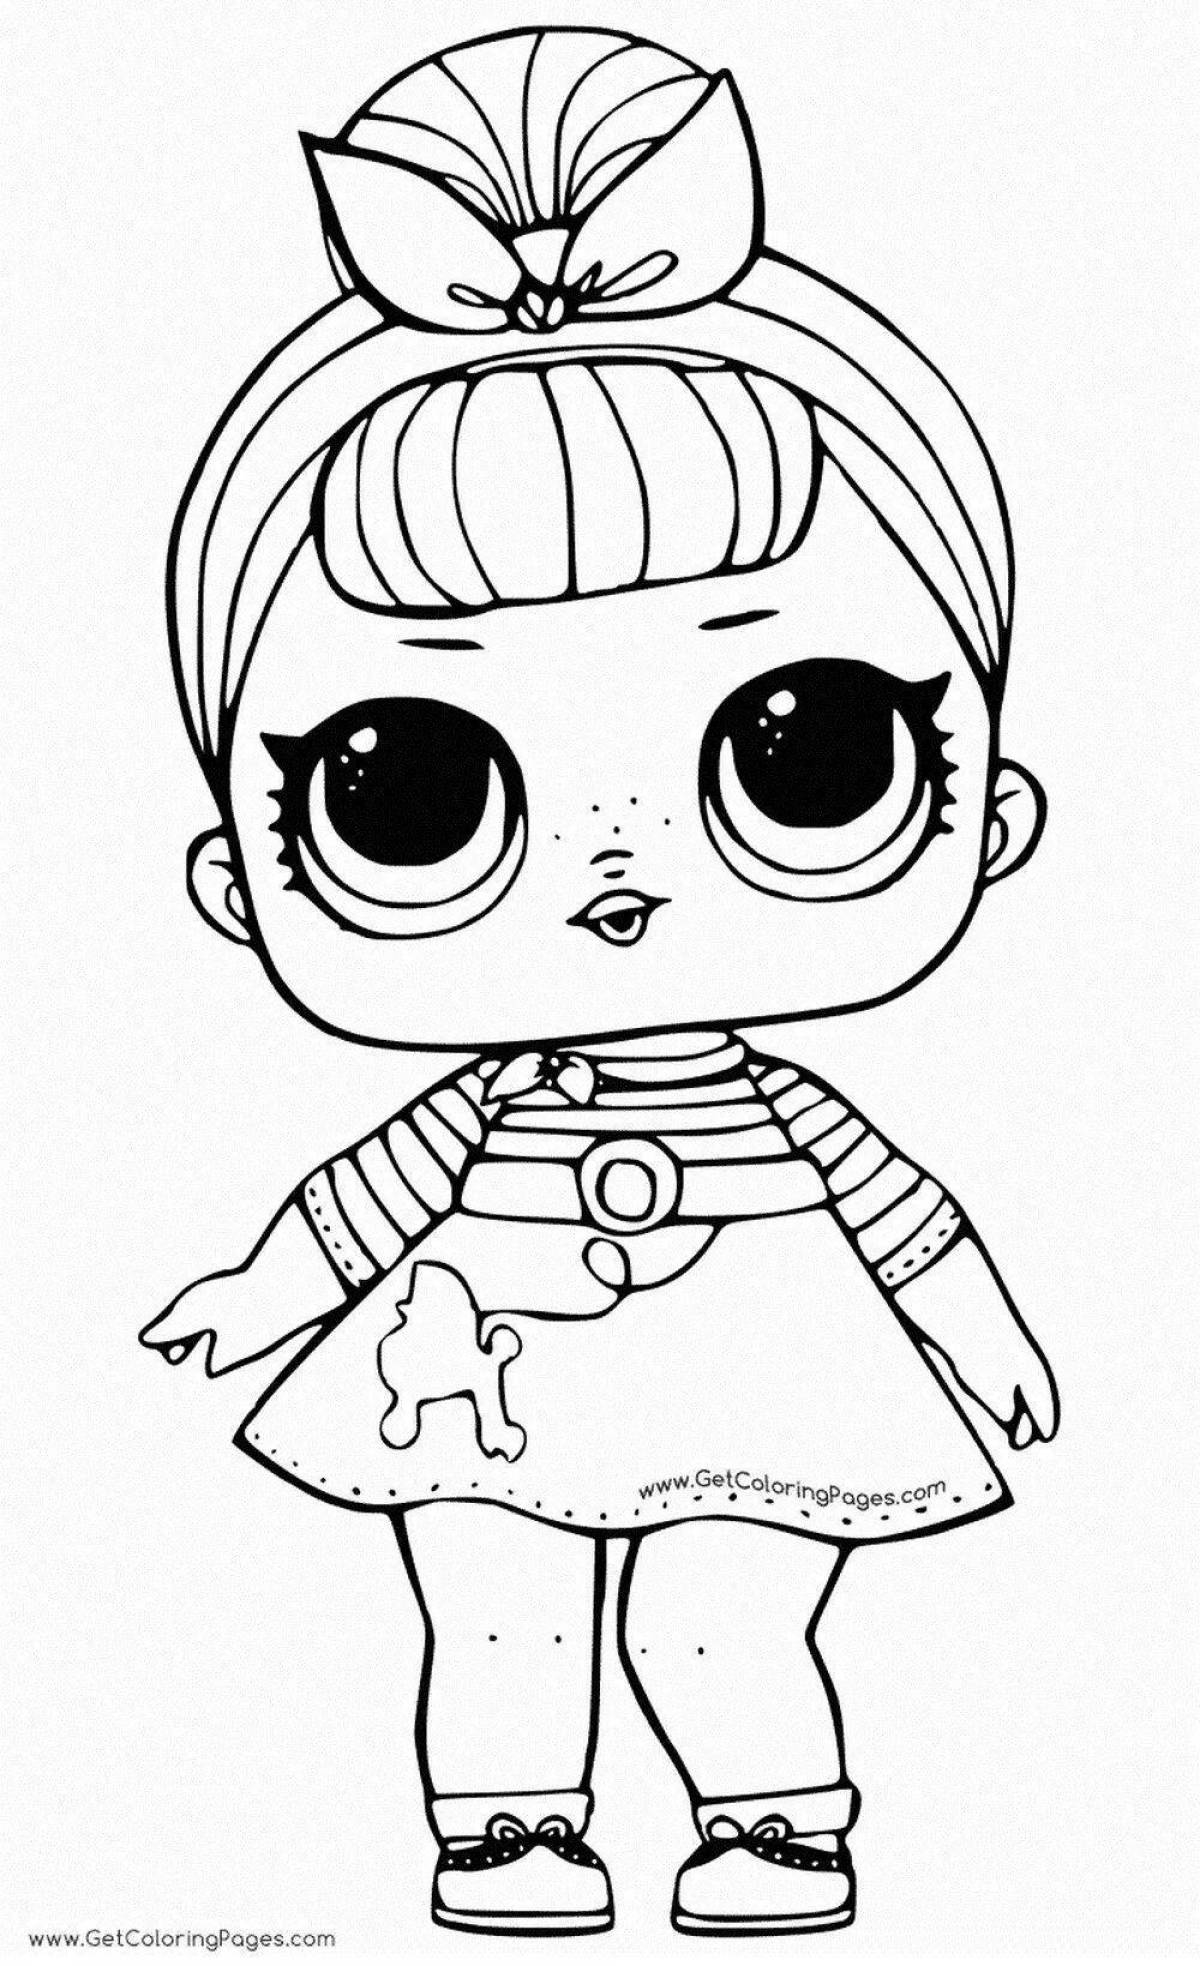 Playful lol doll coloring book